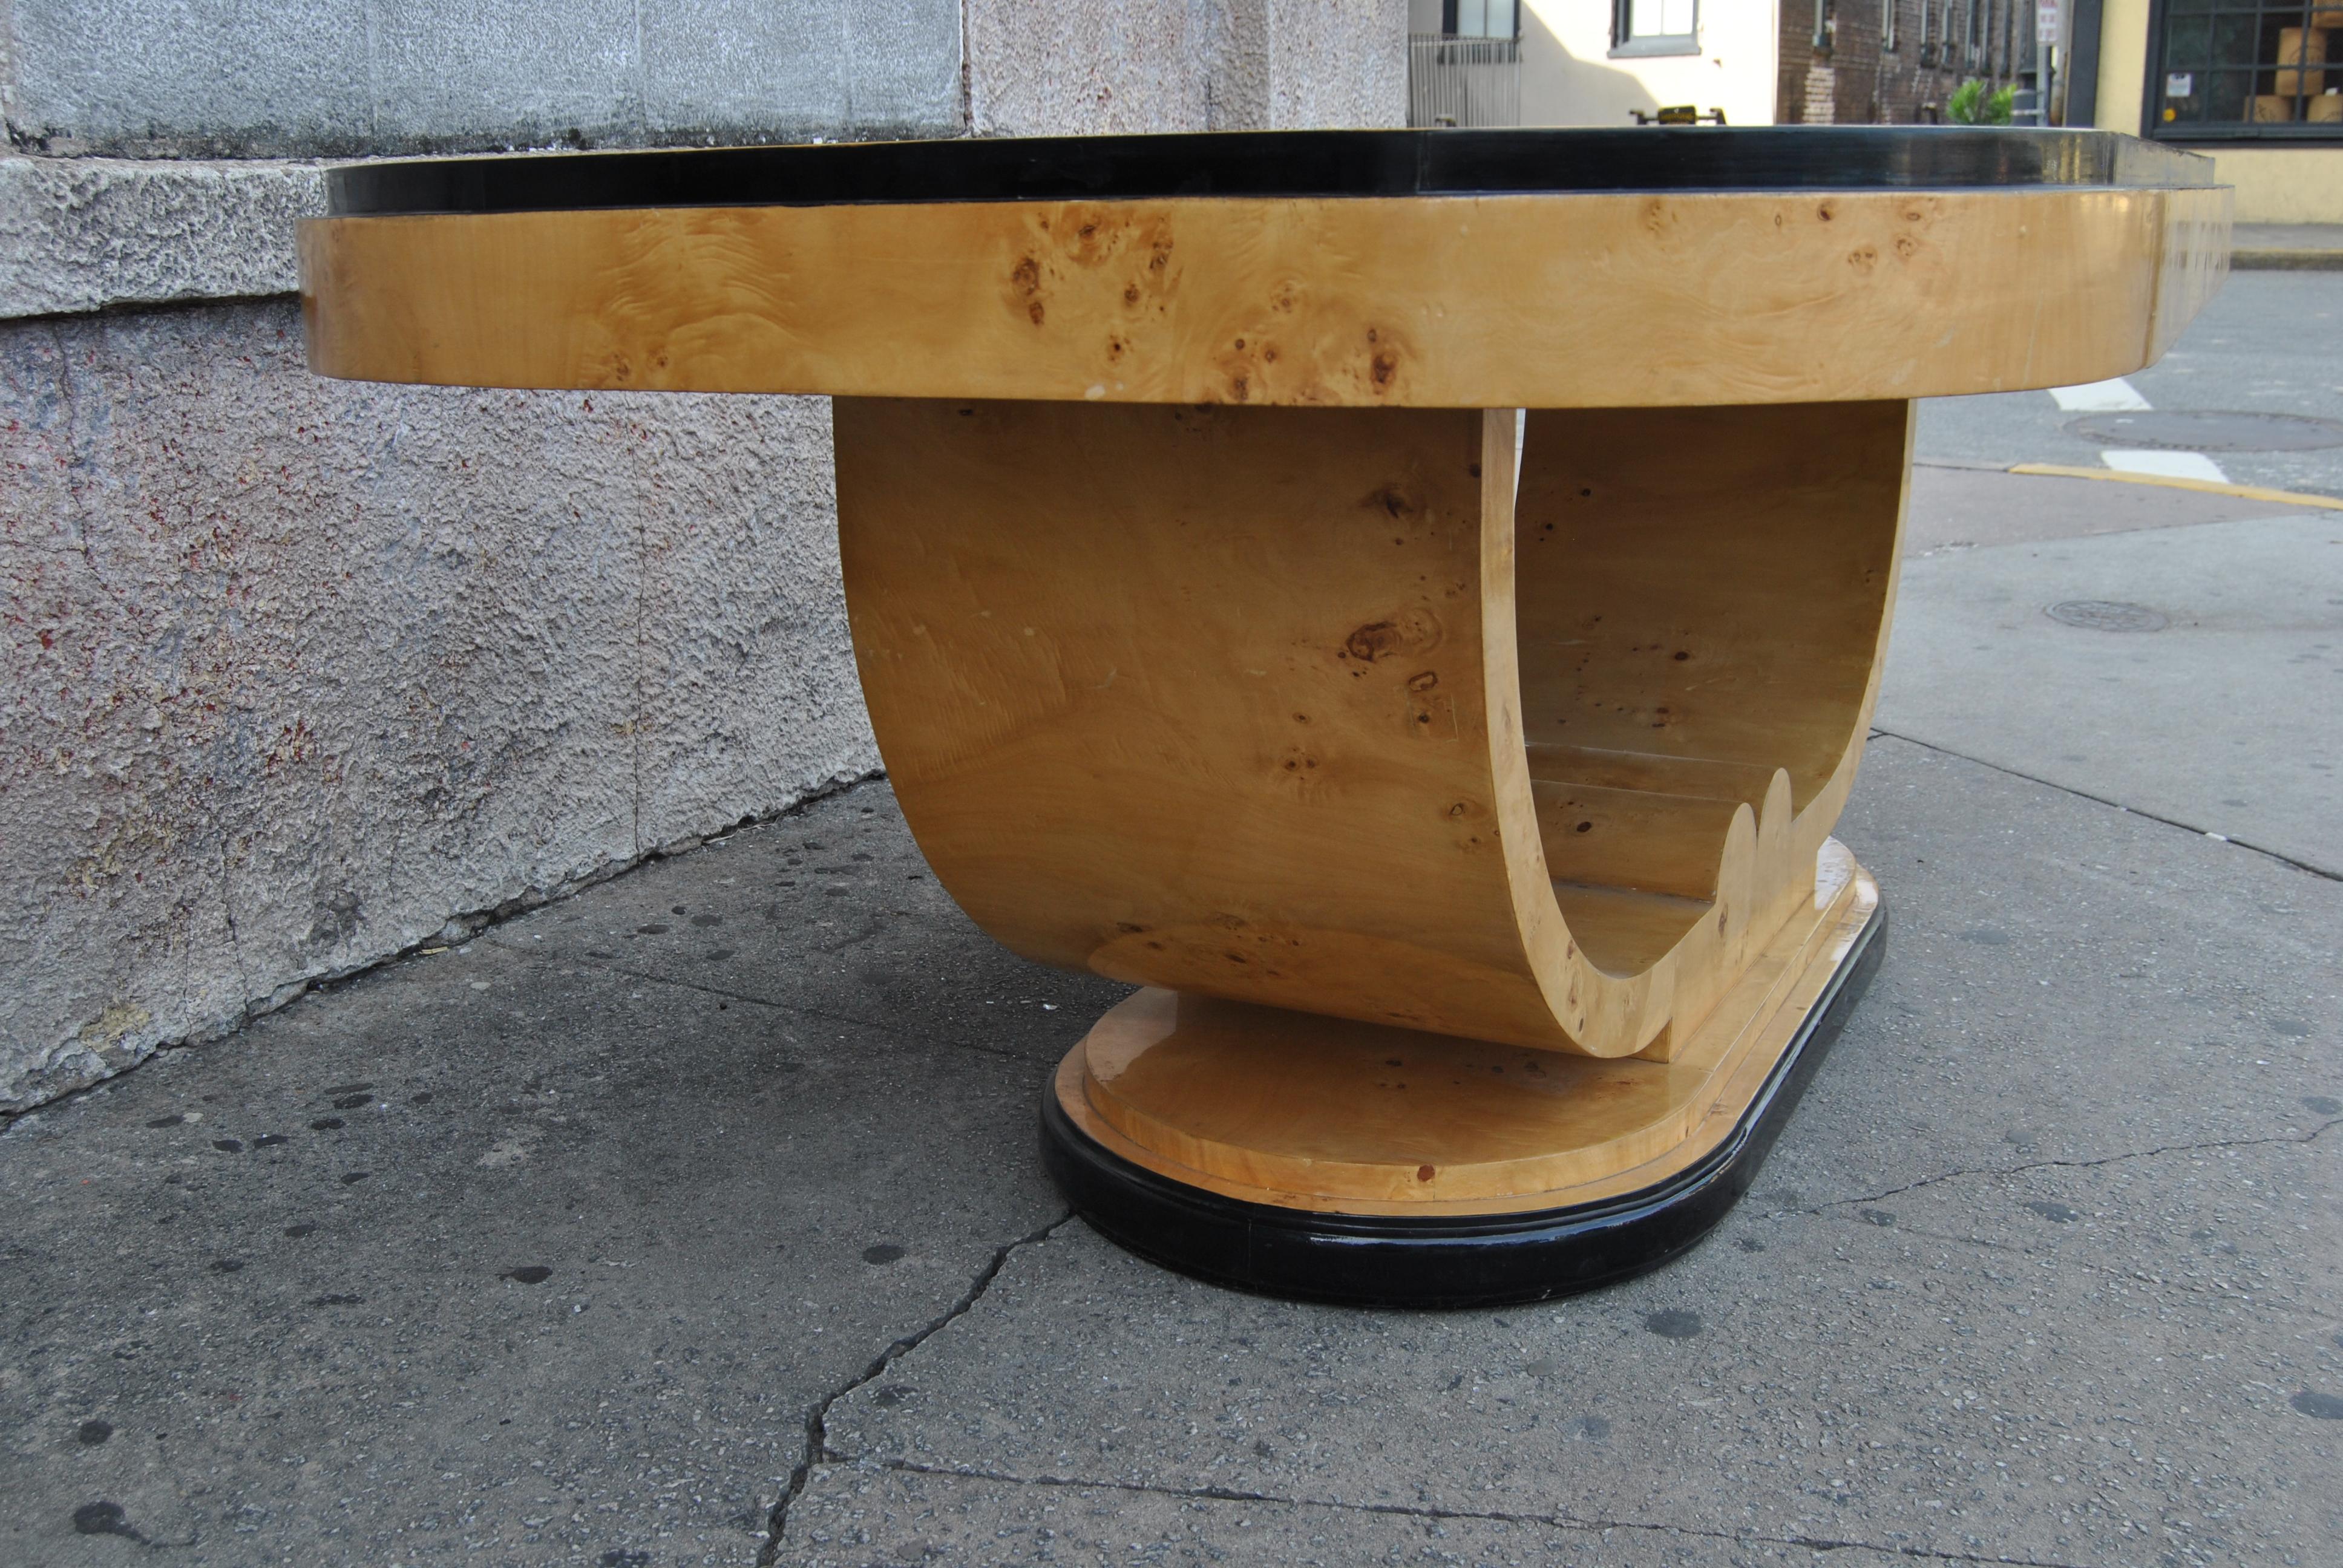 This is a table made in England, circa 1960. The table is in a beautiful high fashion Art Deco style. The table is made of an absolutely beautiful cut of bird's-eye Maple. It has a stunning U-shaped base that sits on a 2 step platform. The table has